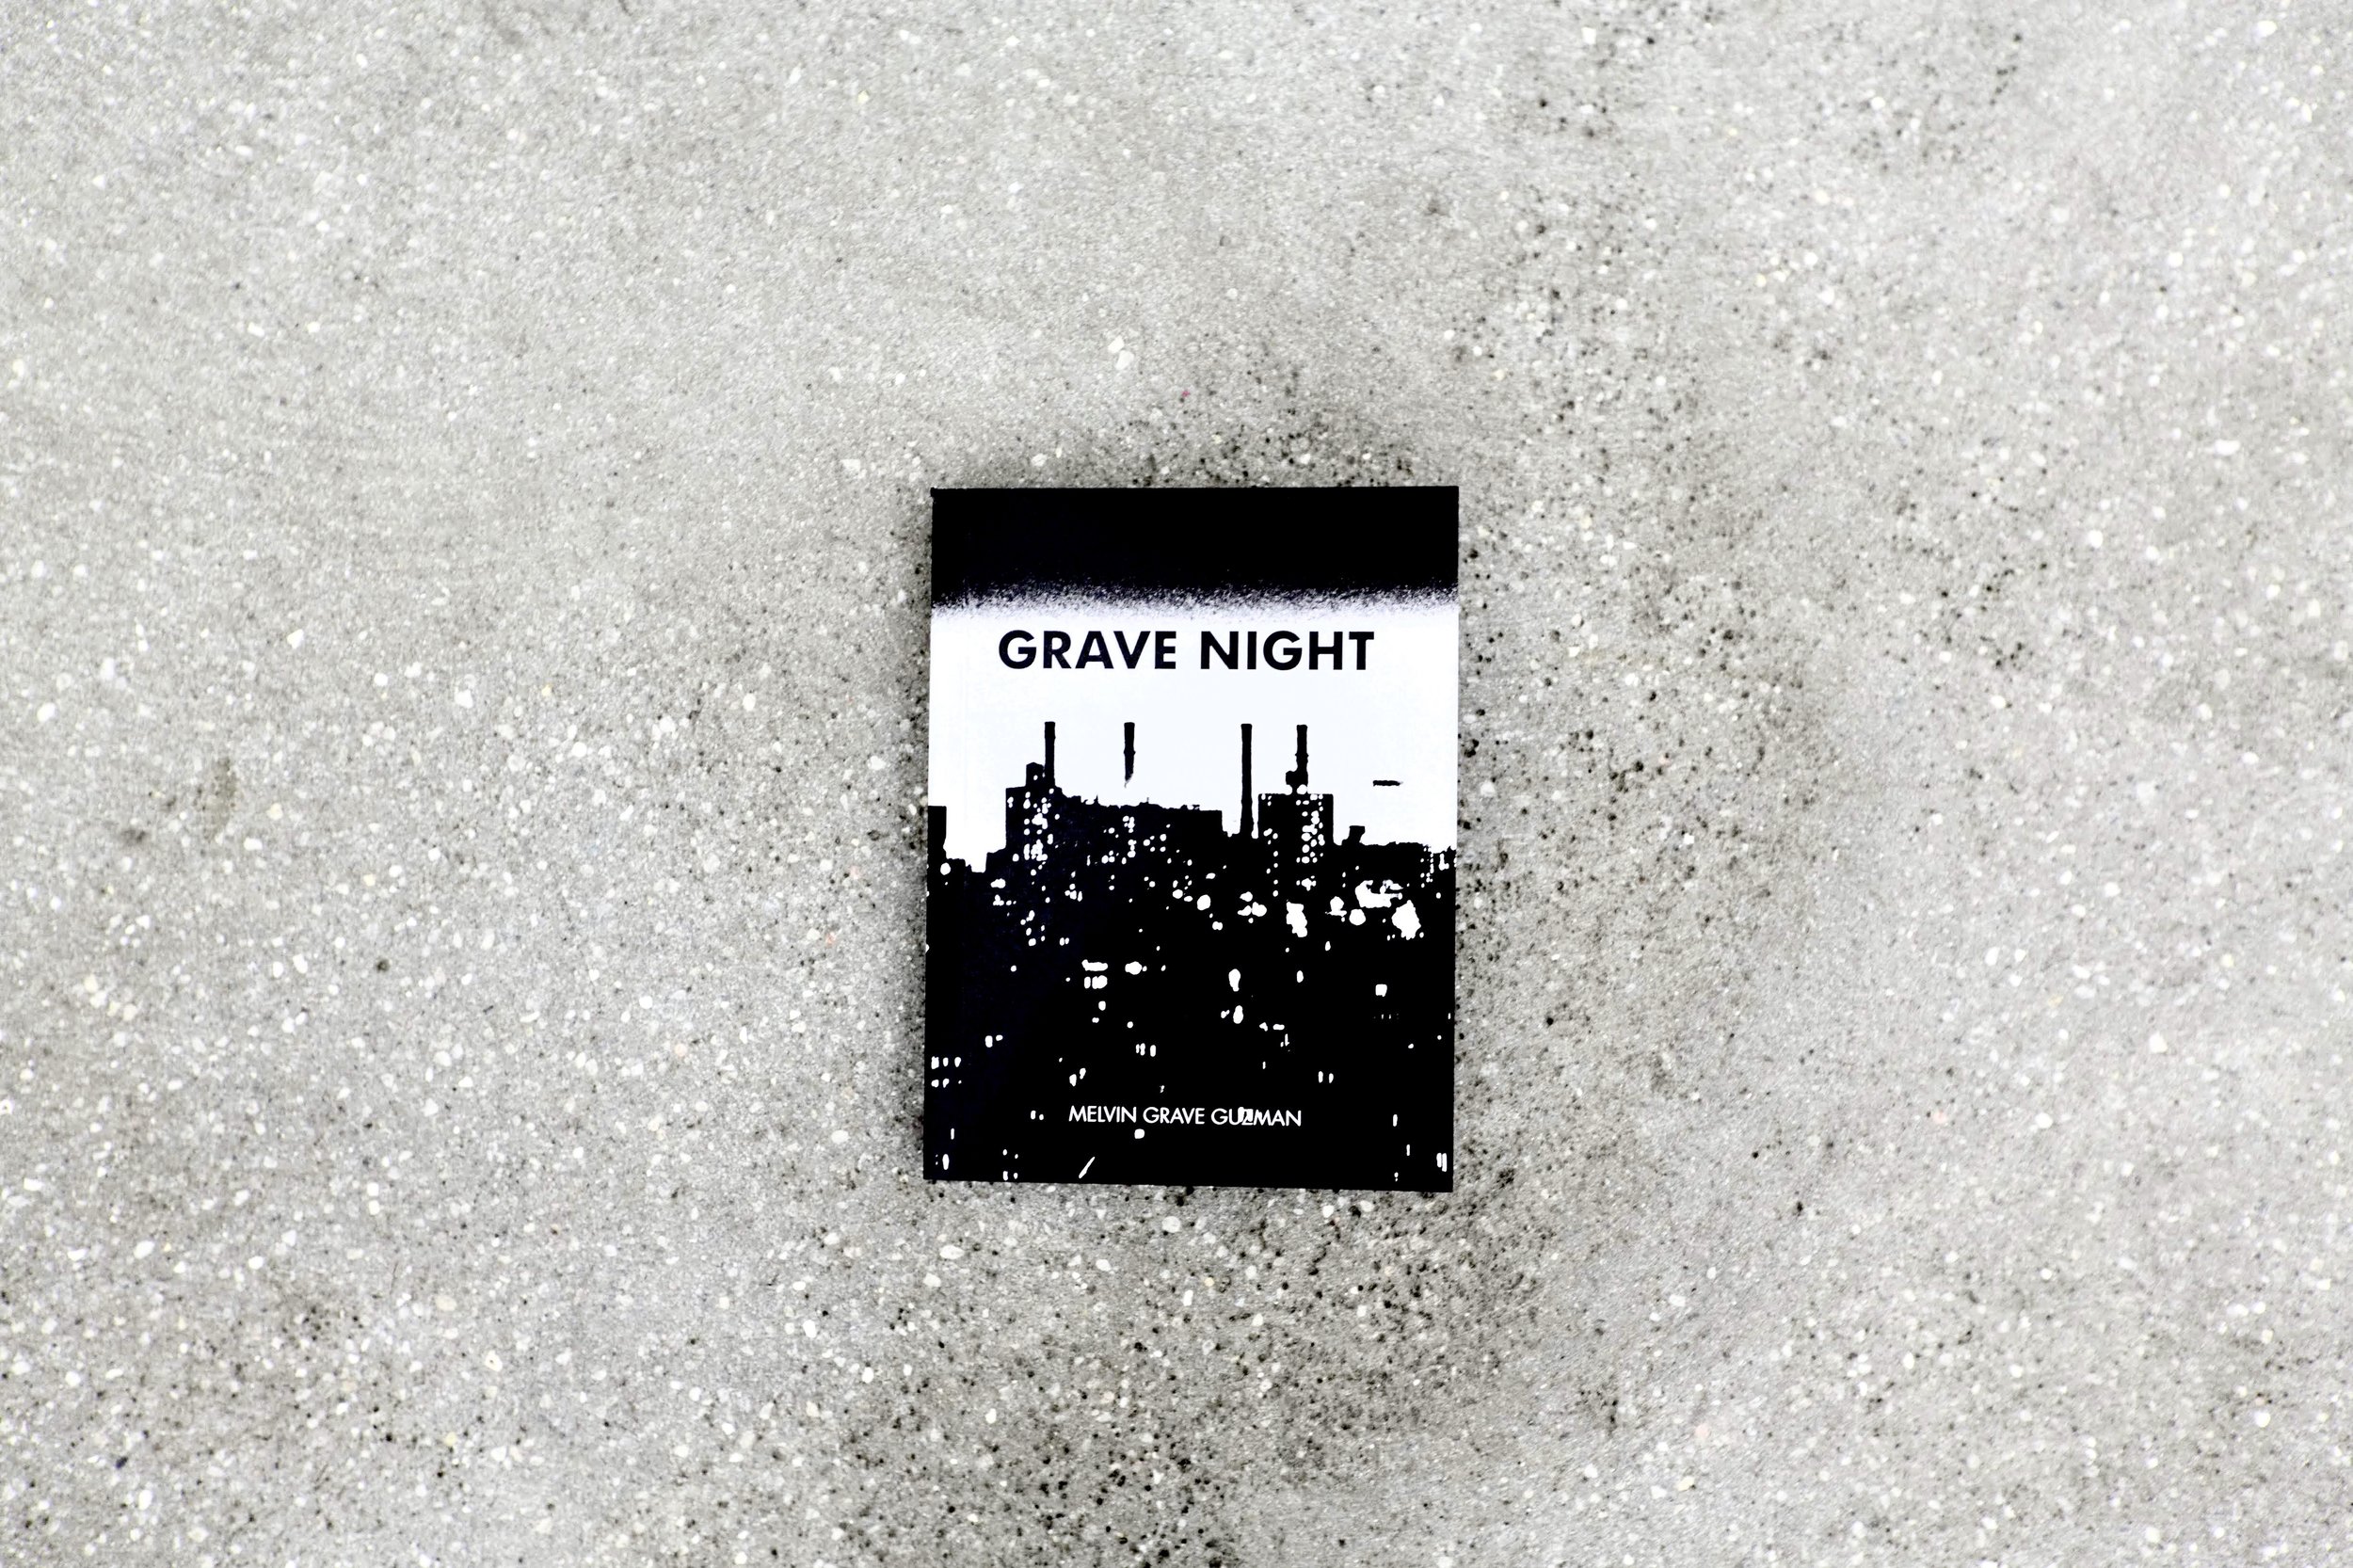 Melvin (Grave) Guzman GRAVE NIGHT, 2018 6 x 4.5 inches,  235 pages 50.jpg